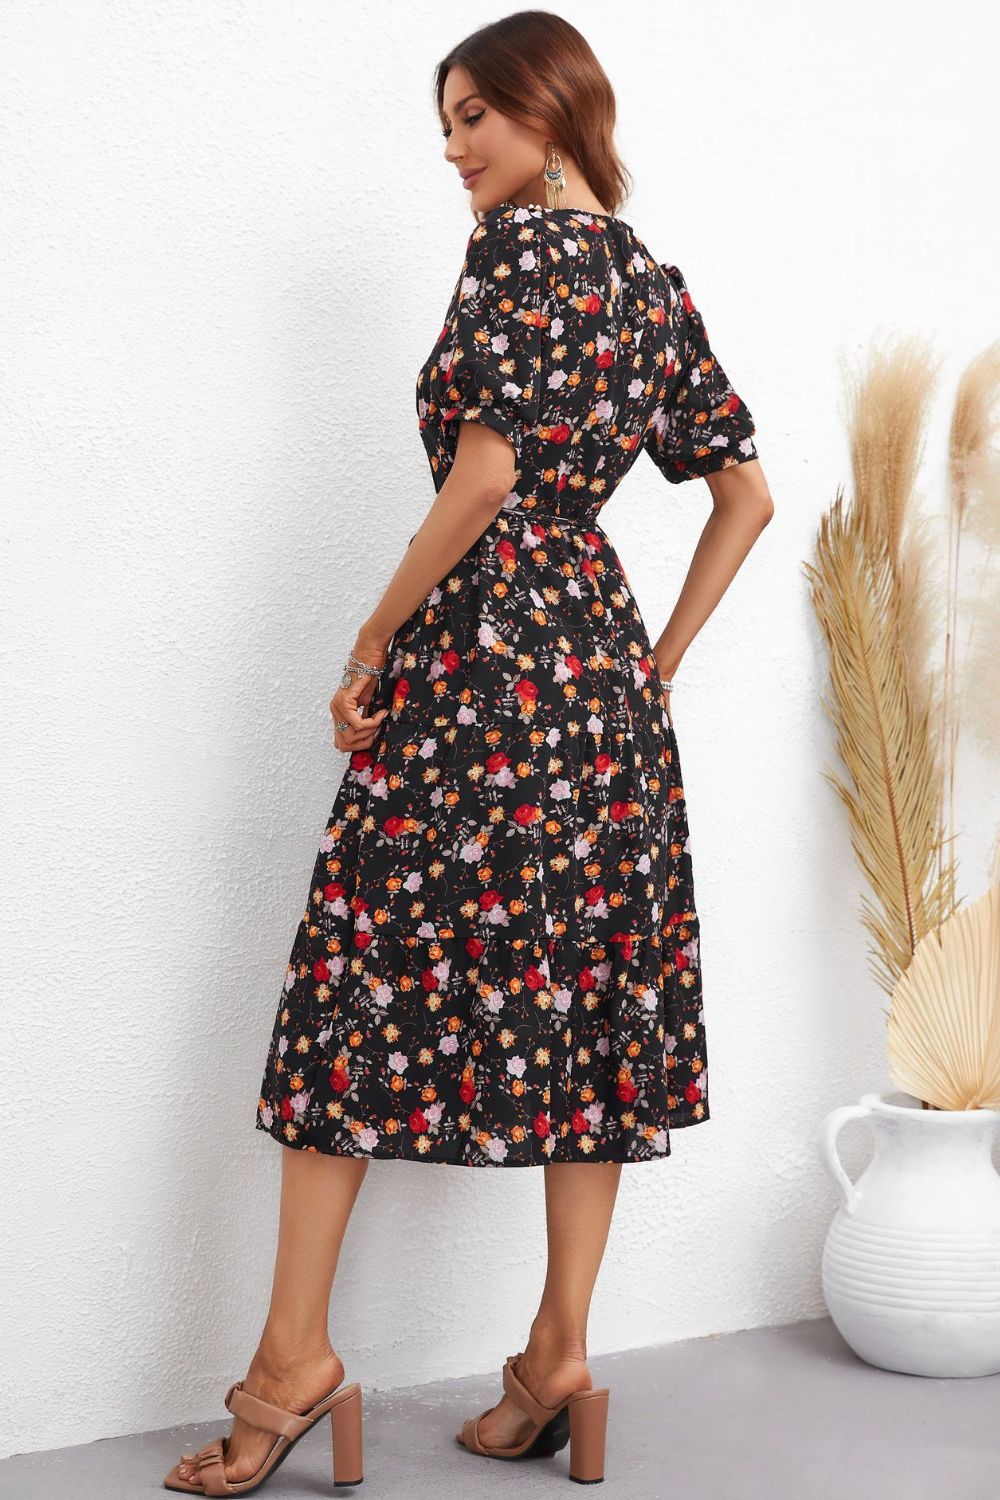 Women’s Floral Collared Neck Puff Sleeve Dress